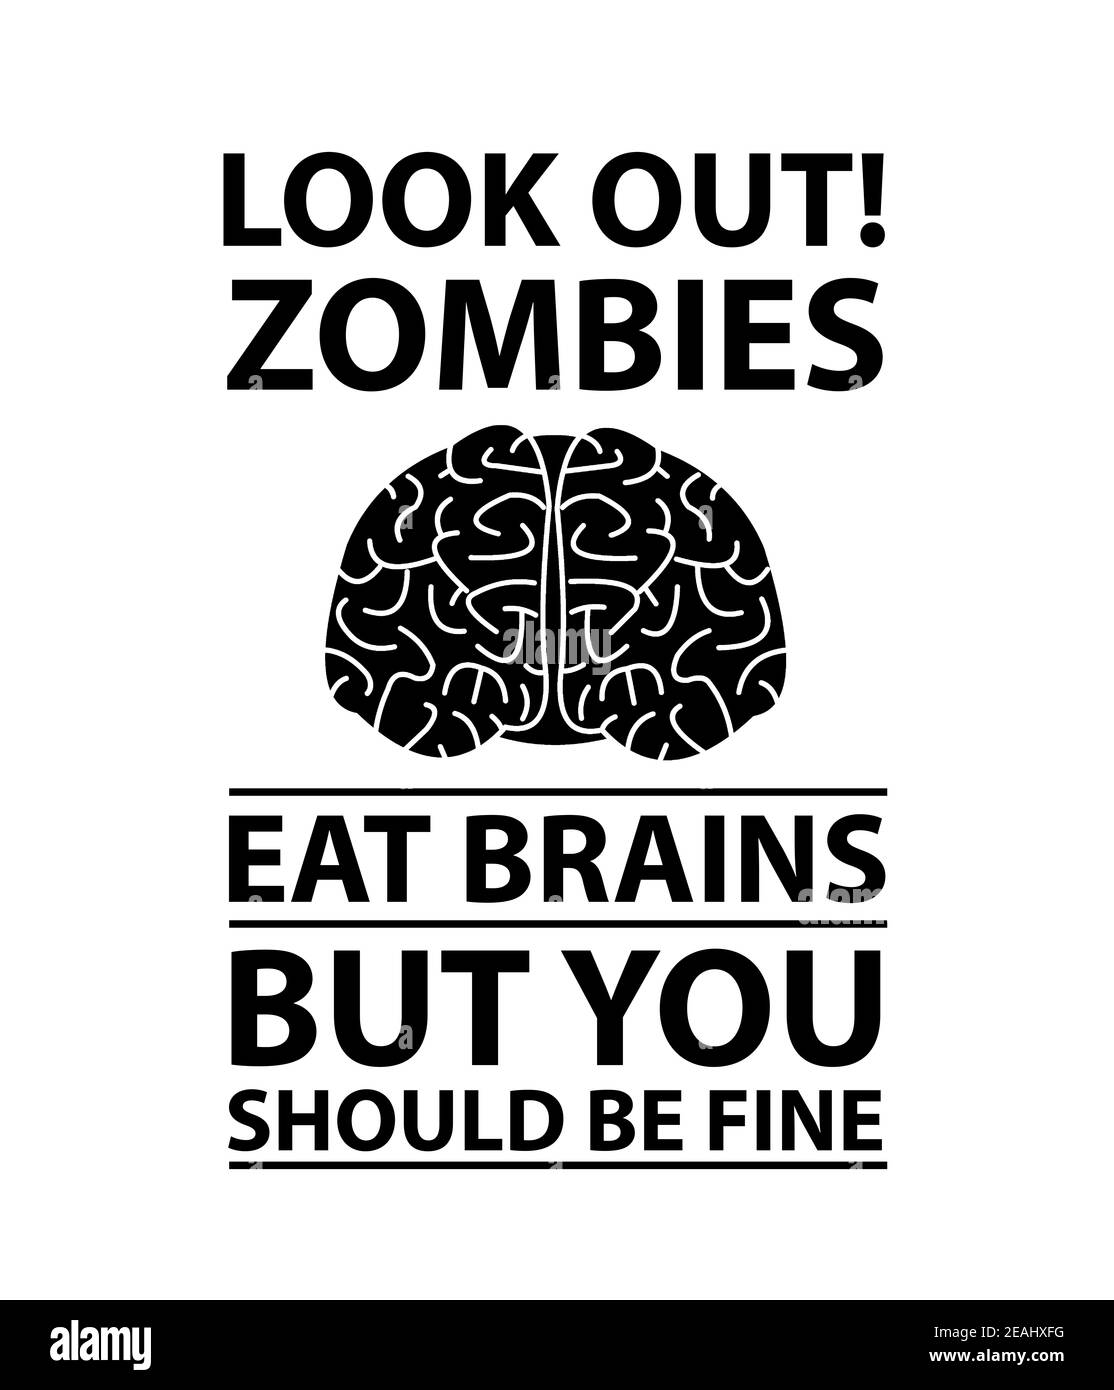 Look Out - Zombies Eat Brains Stock Photo